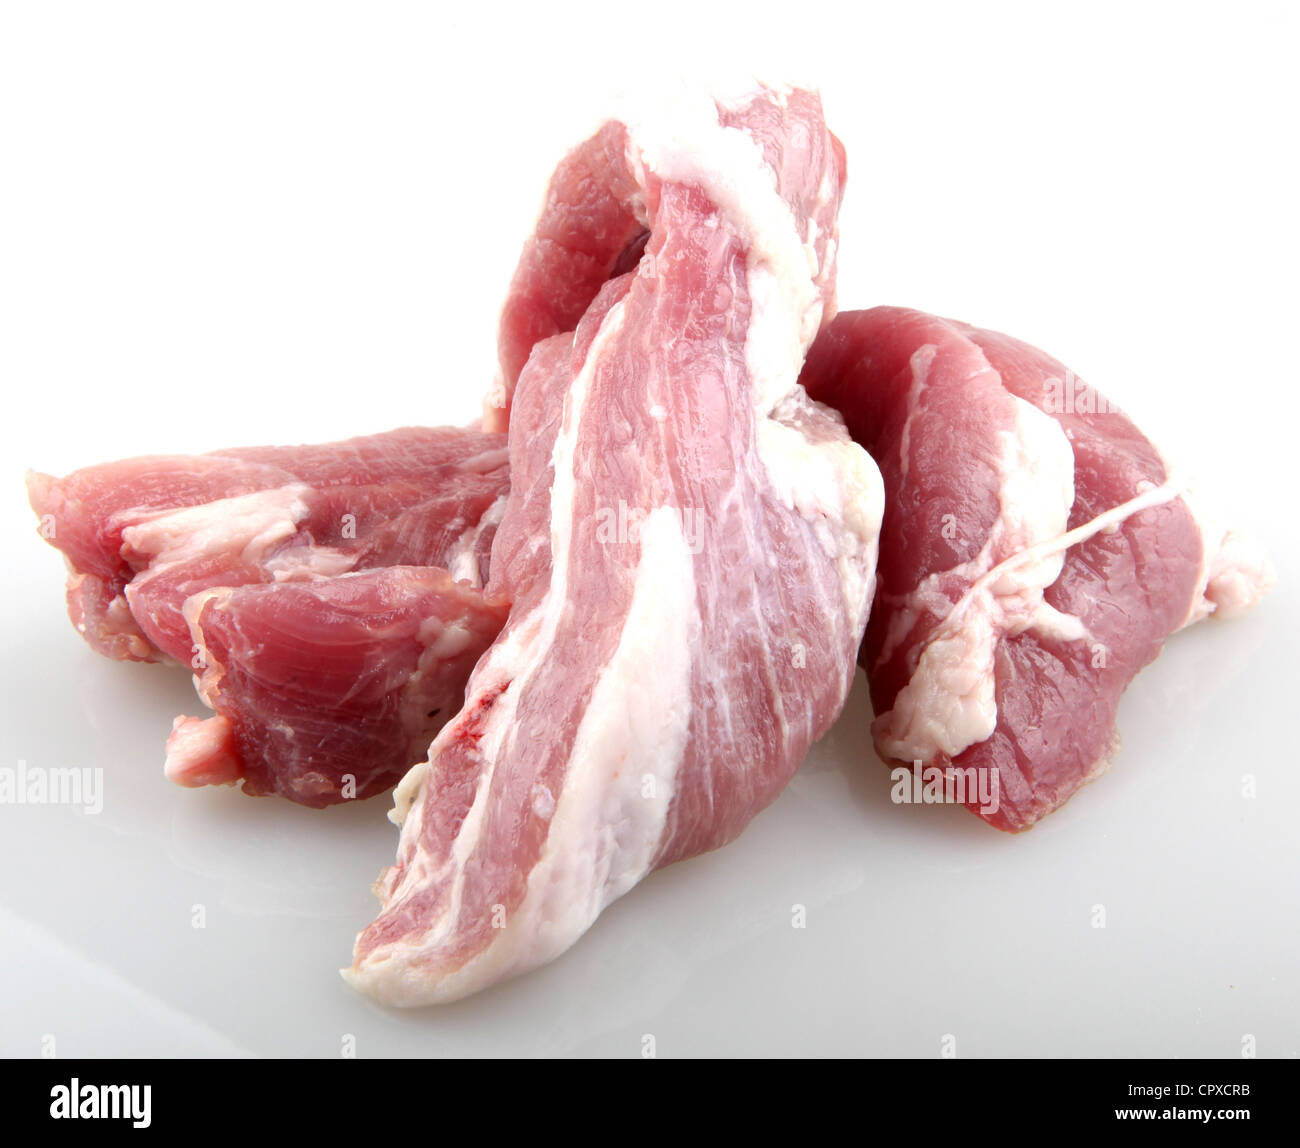 Sliced raw meat Stock Photo